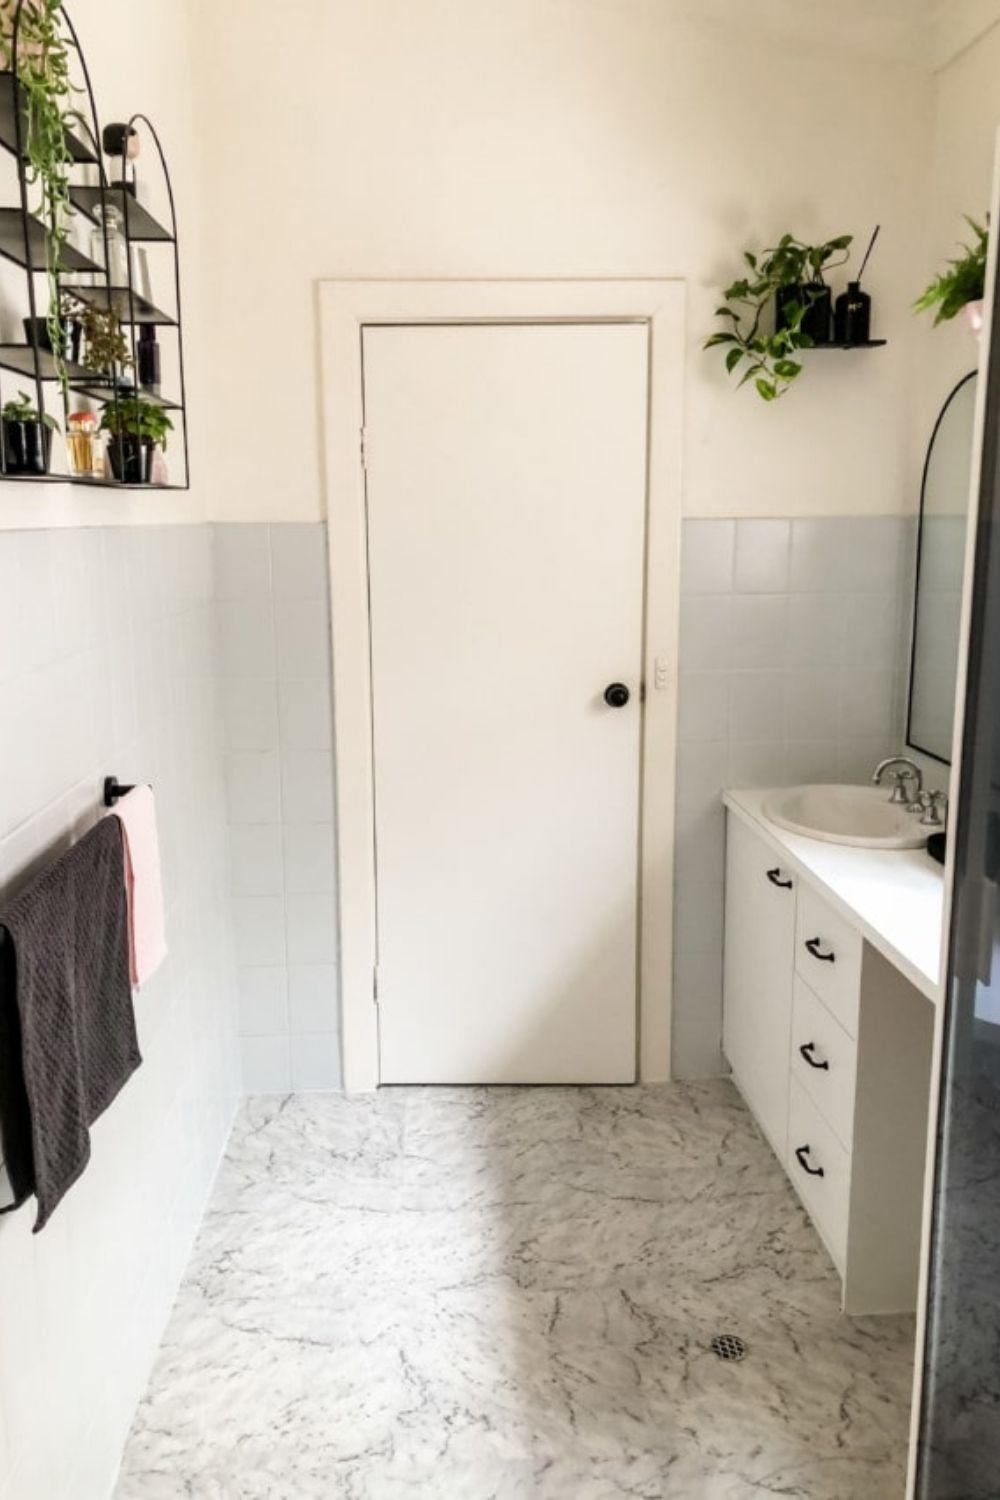 This stunning bathroom makeover cost only 0 using self-stick vinyl floor tiles 